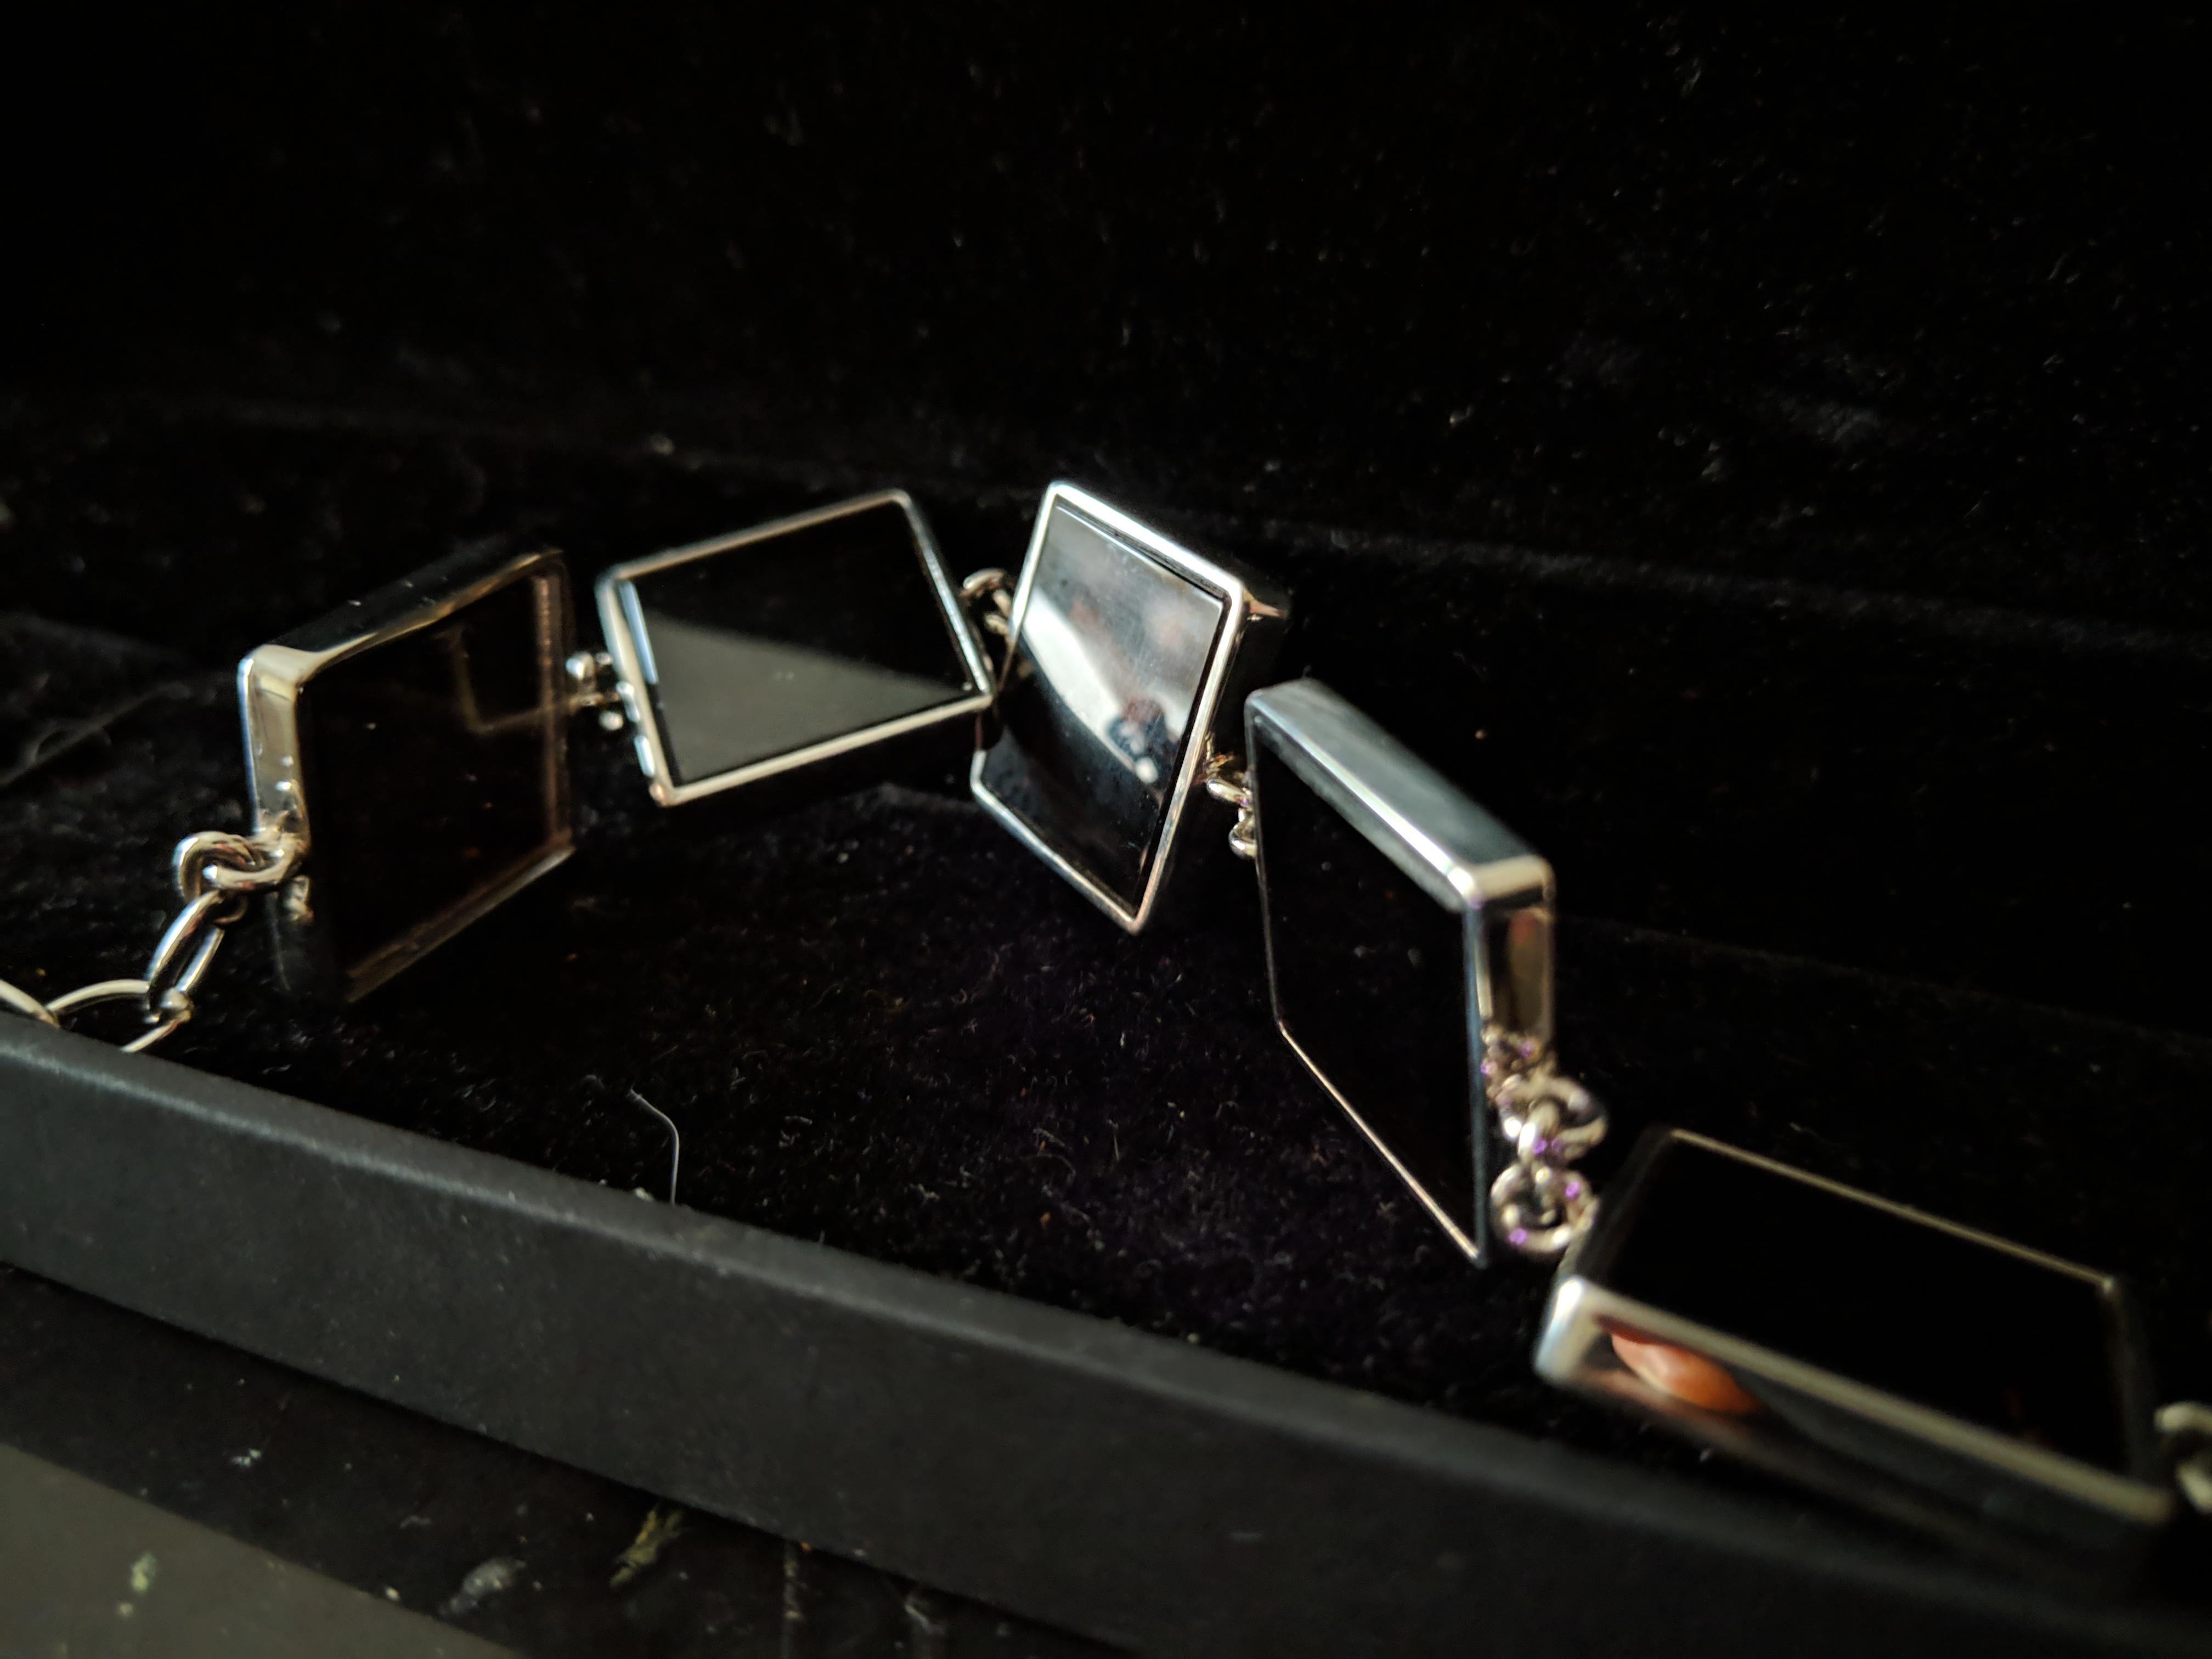 Contemporary Link Bracelet with Smoky Quartzes, Featured in Vogue 5